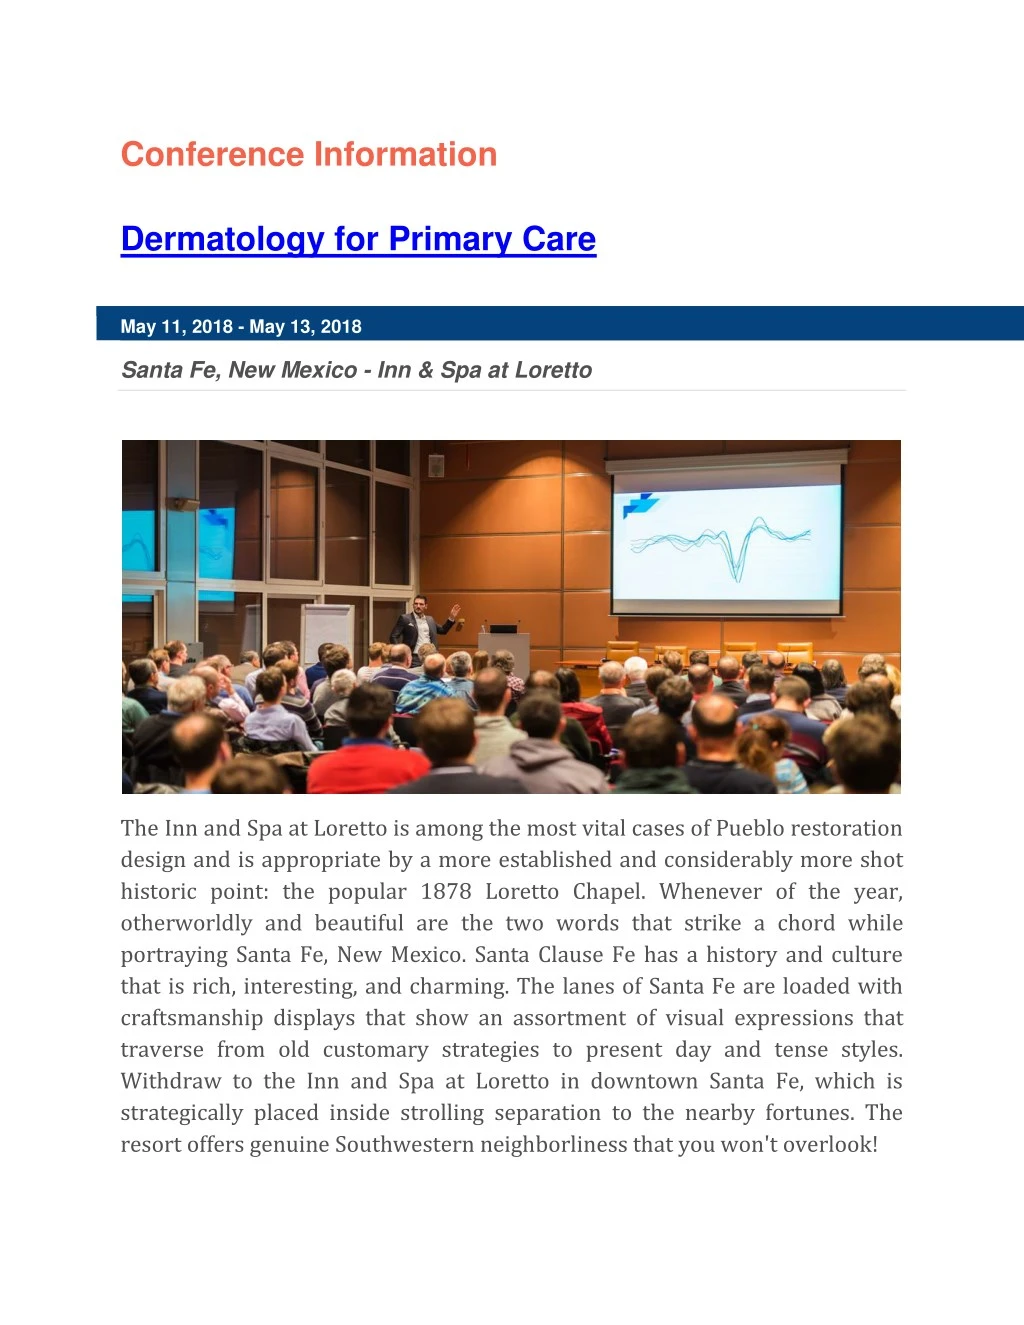 PPT Dermatology for Primary Care CME Conferences PowerPoint